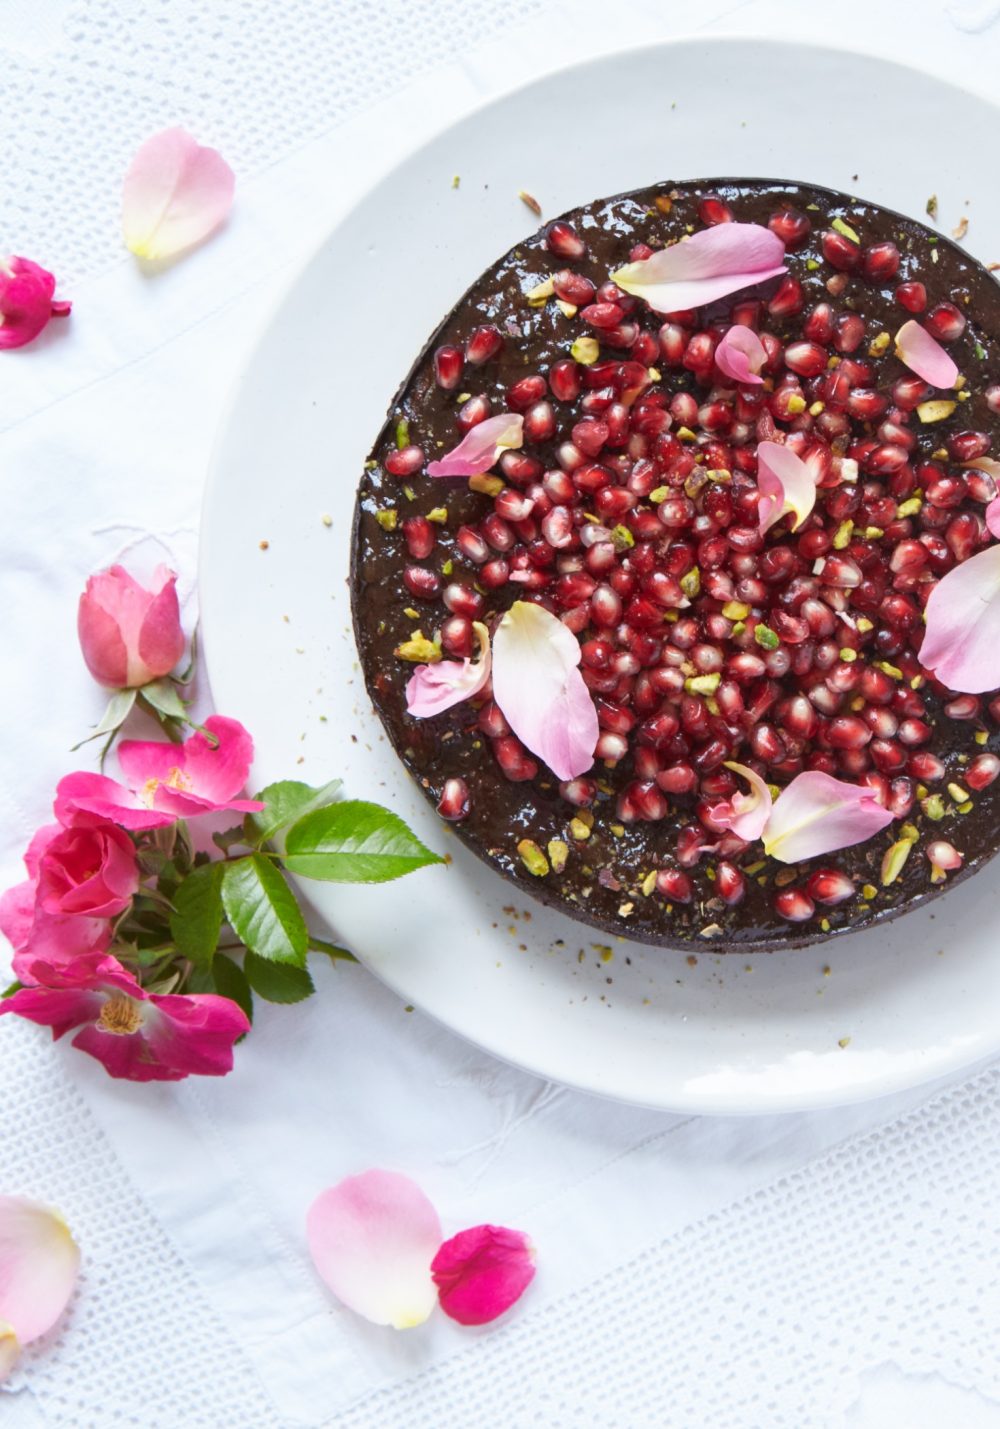 Chocolate and pomegranate cake with rose petals